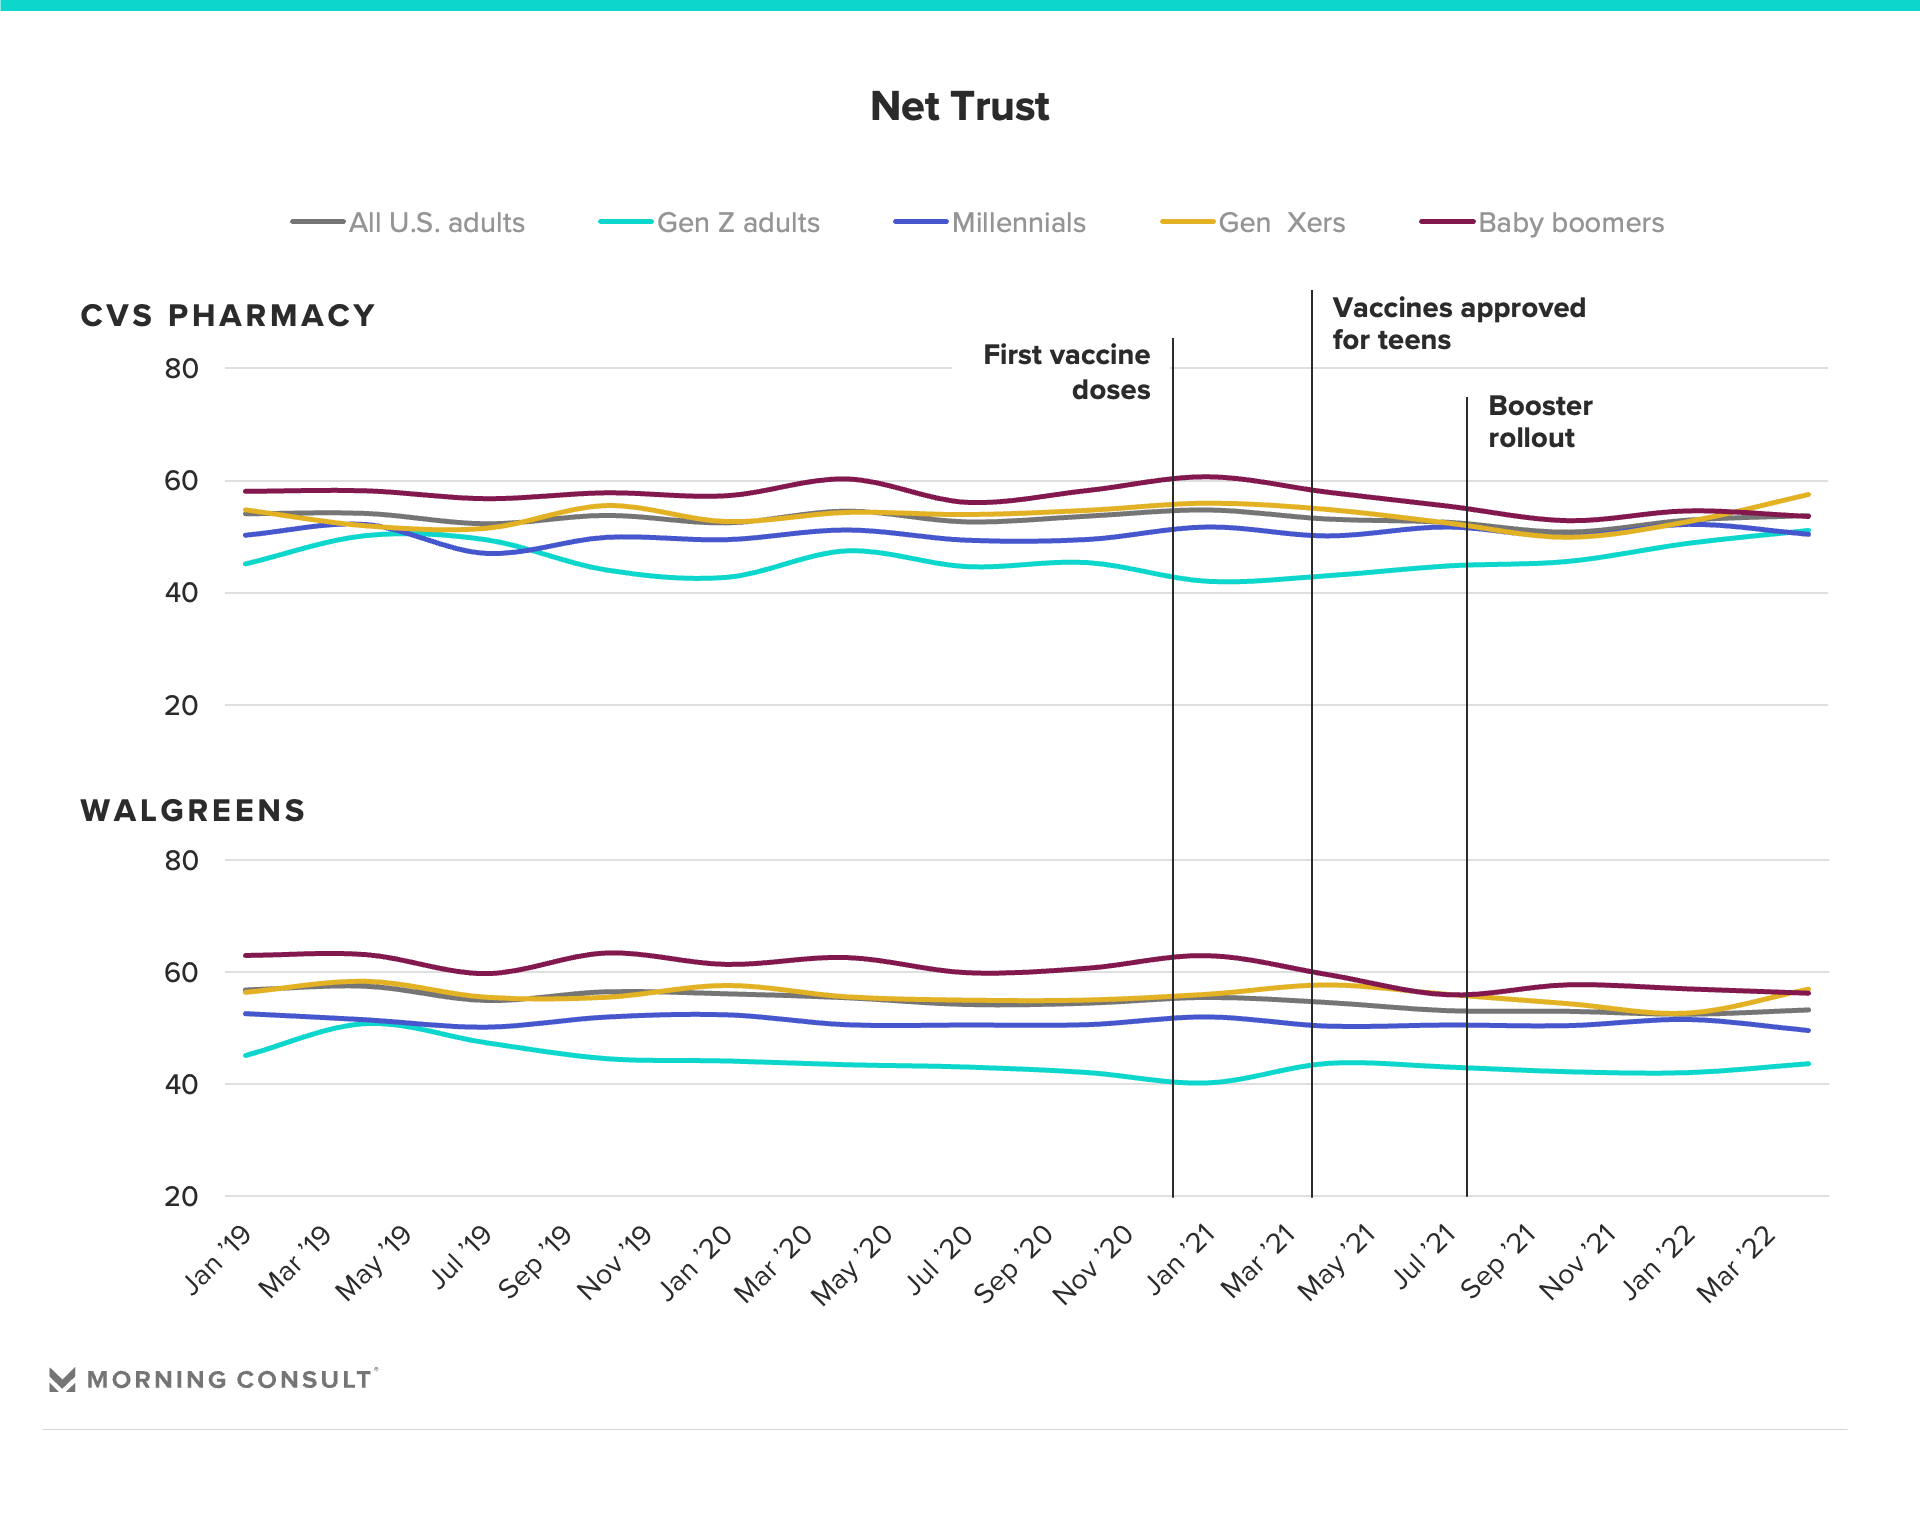 Chart conveying net trust for CVS Pharmacy and Walgreens by generation